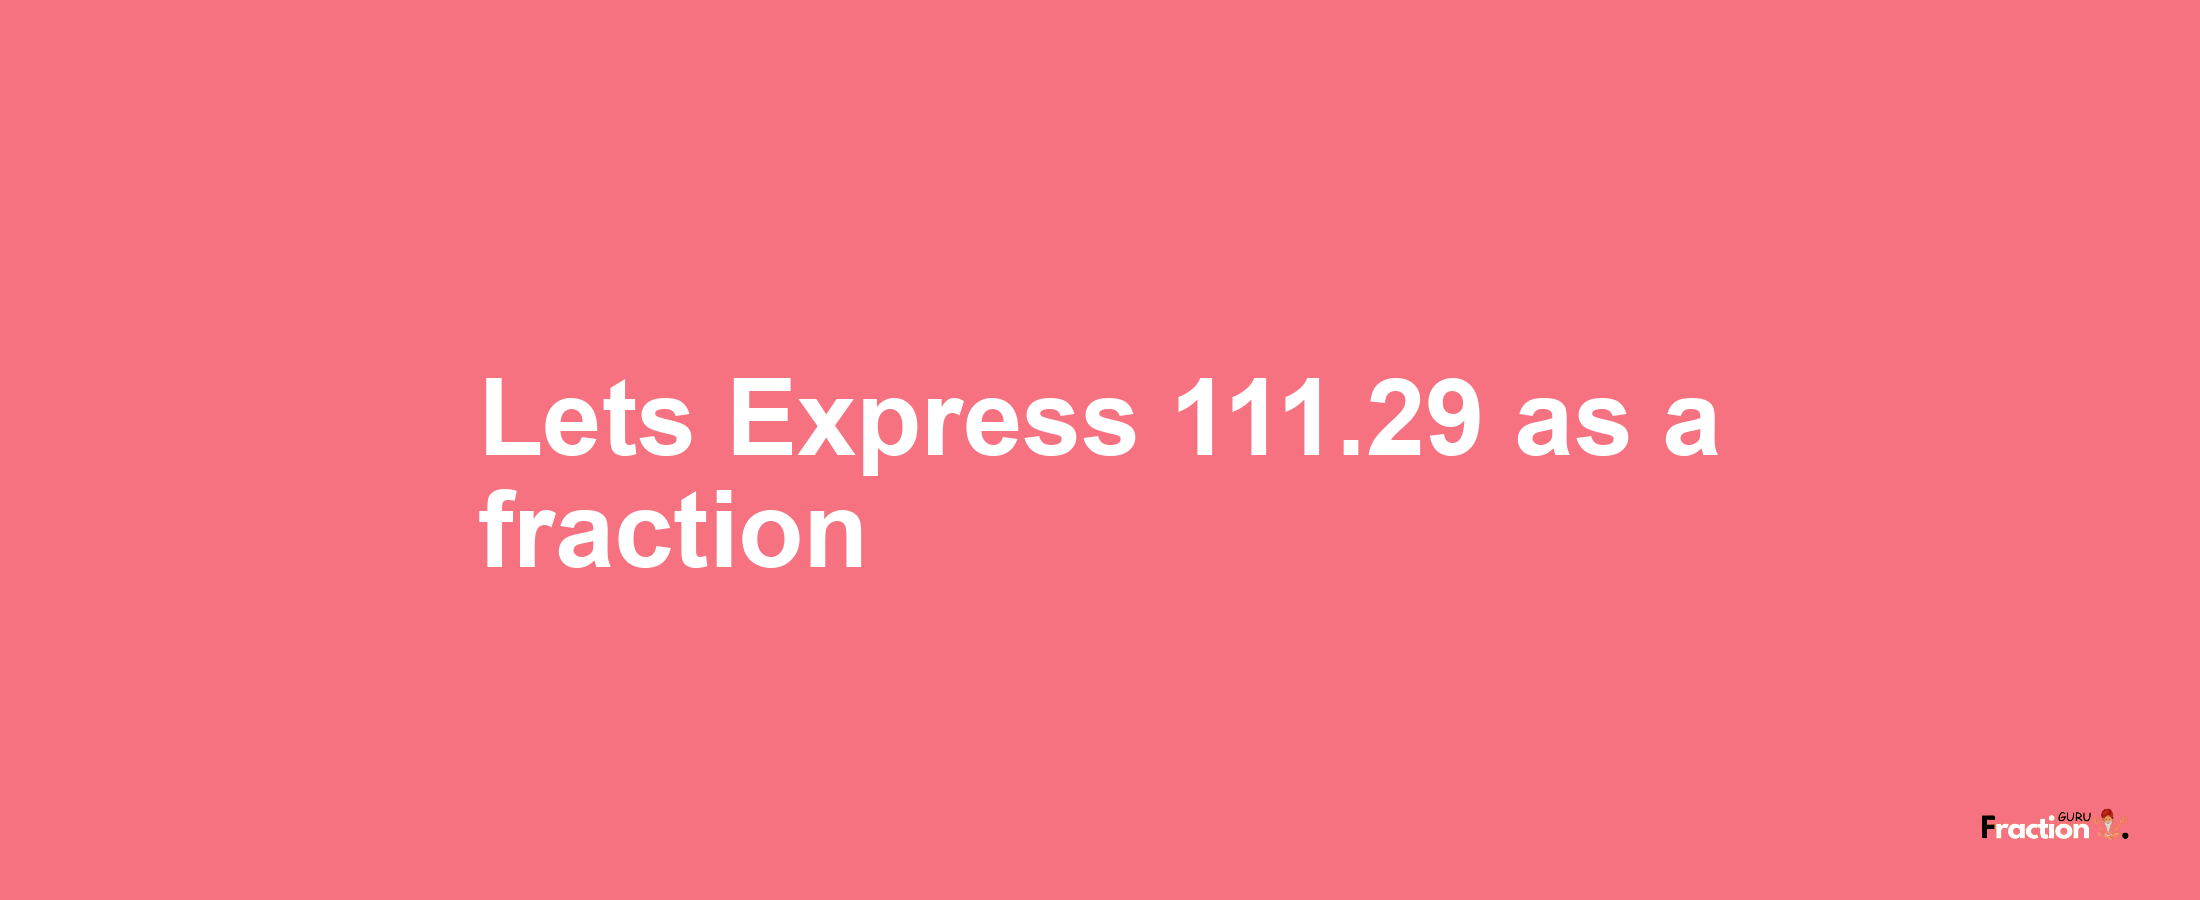 Lets Express 111.29 as afraction